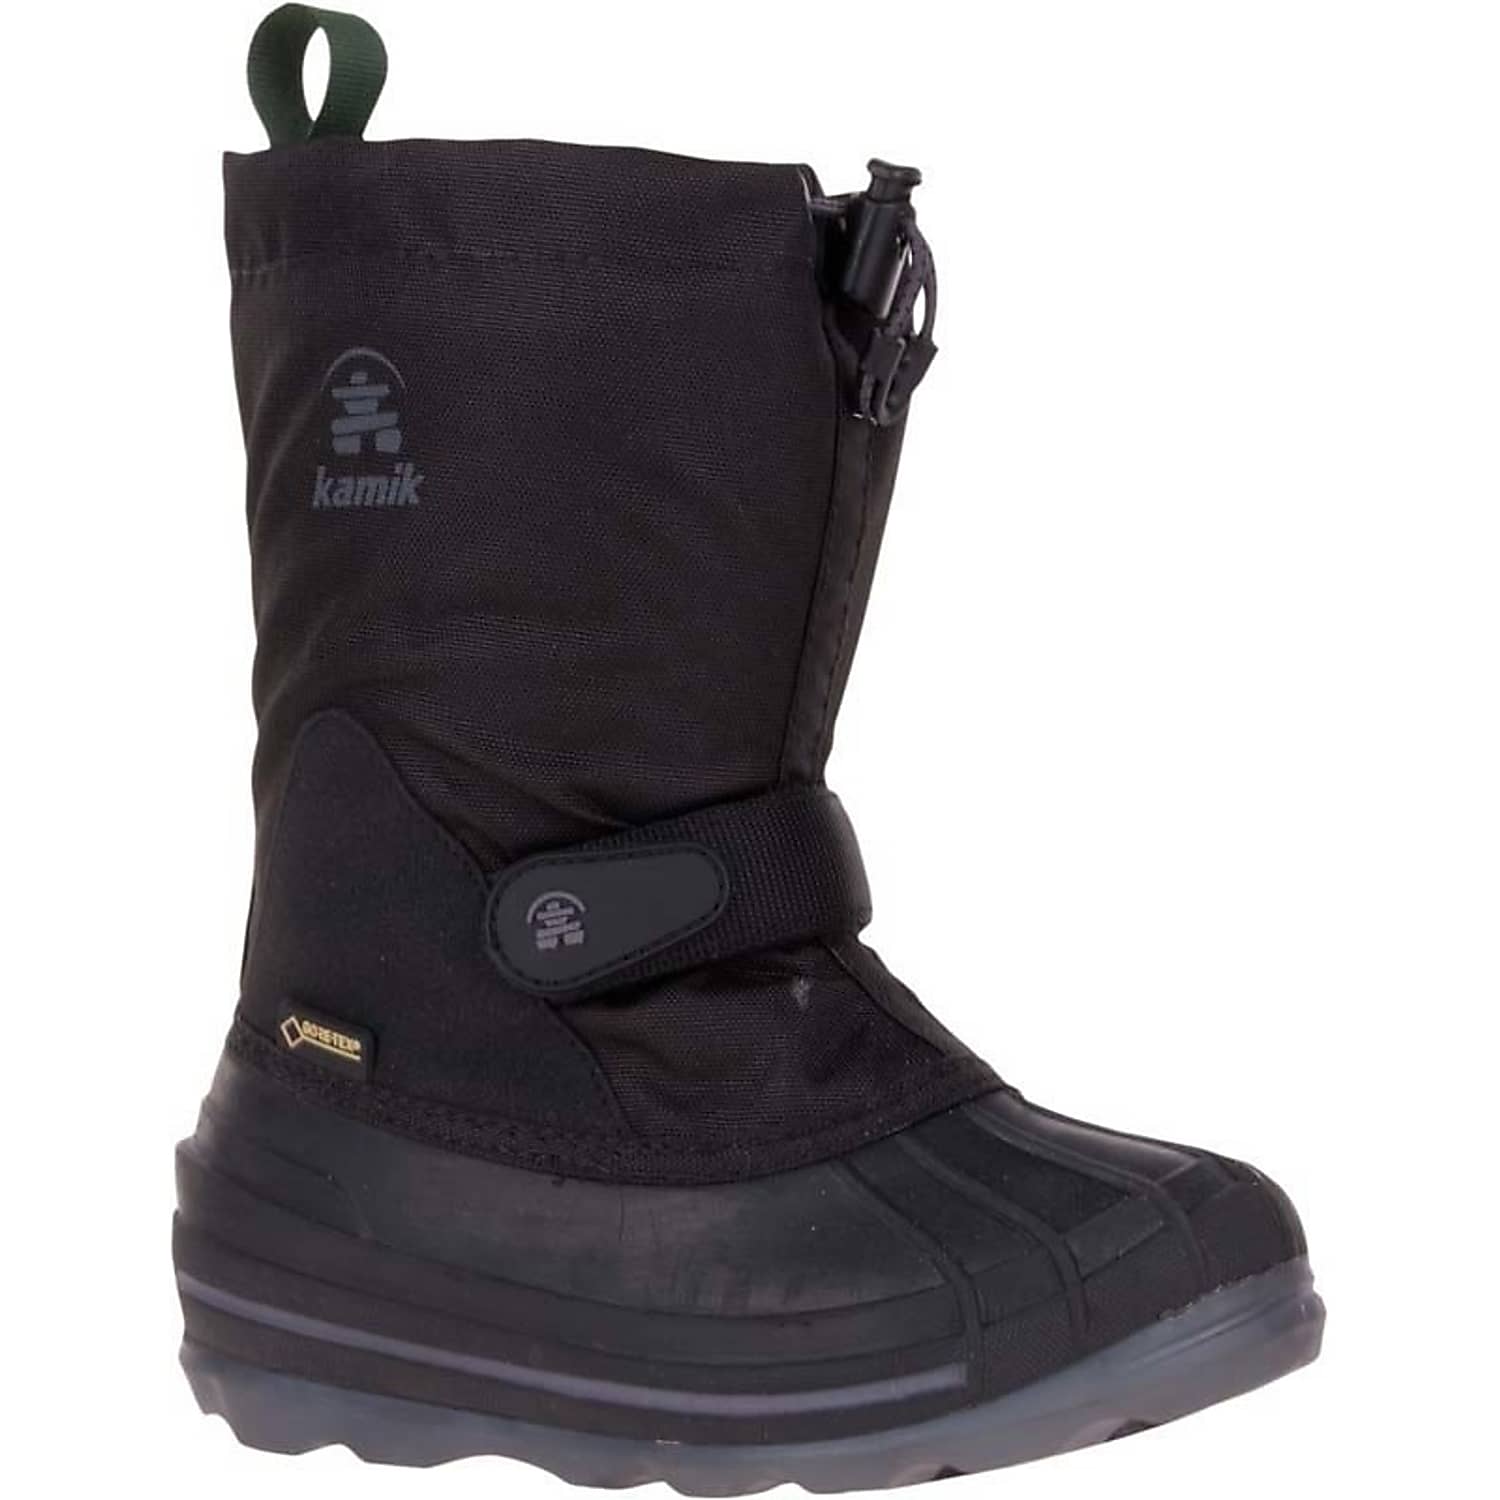 8g insulated work boots